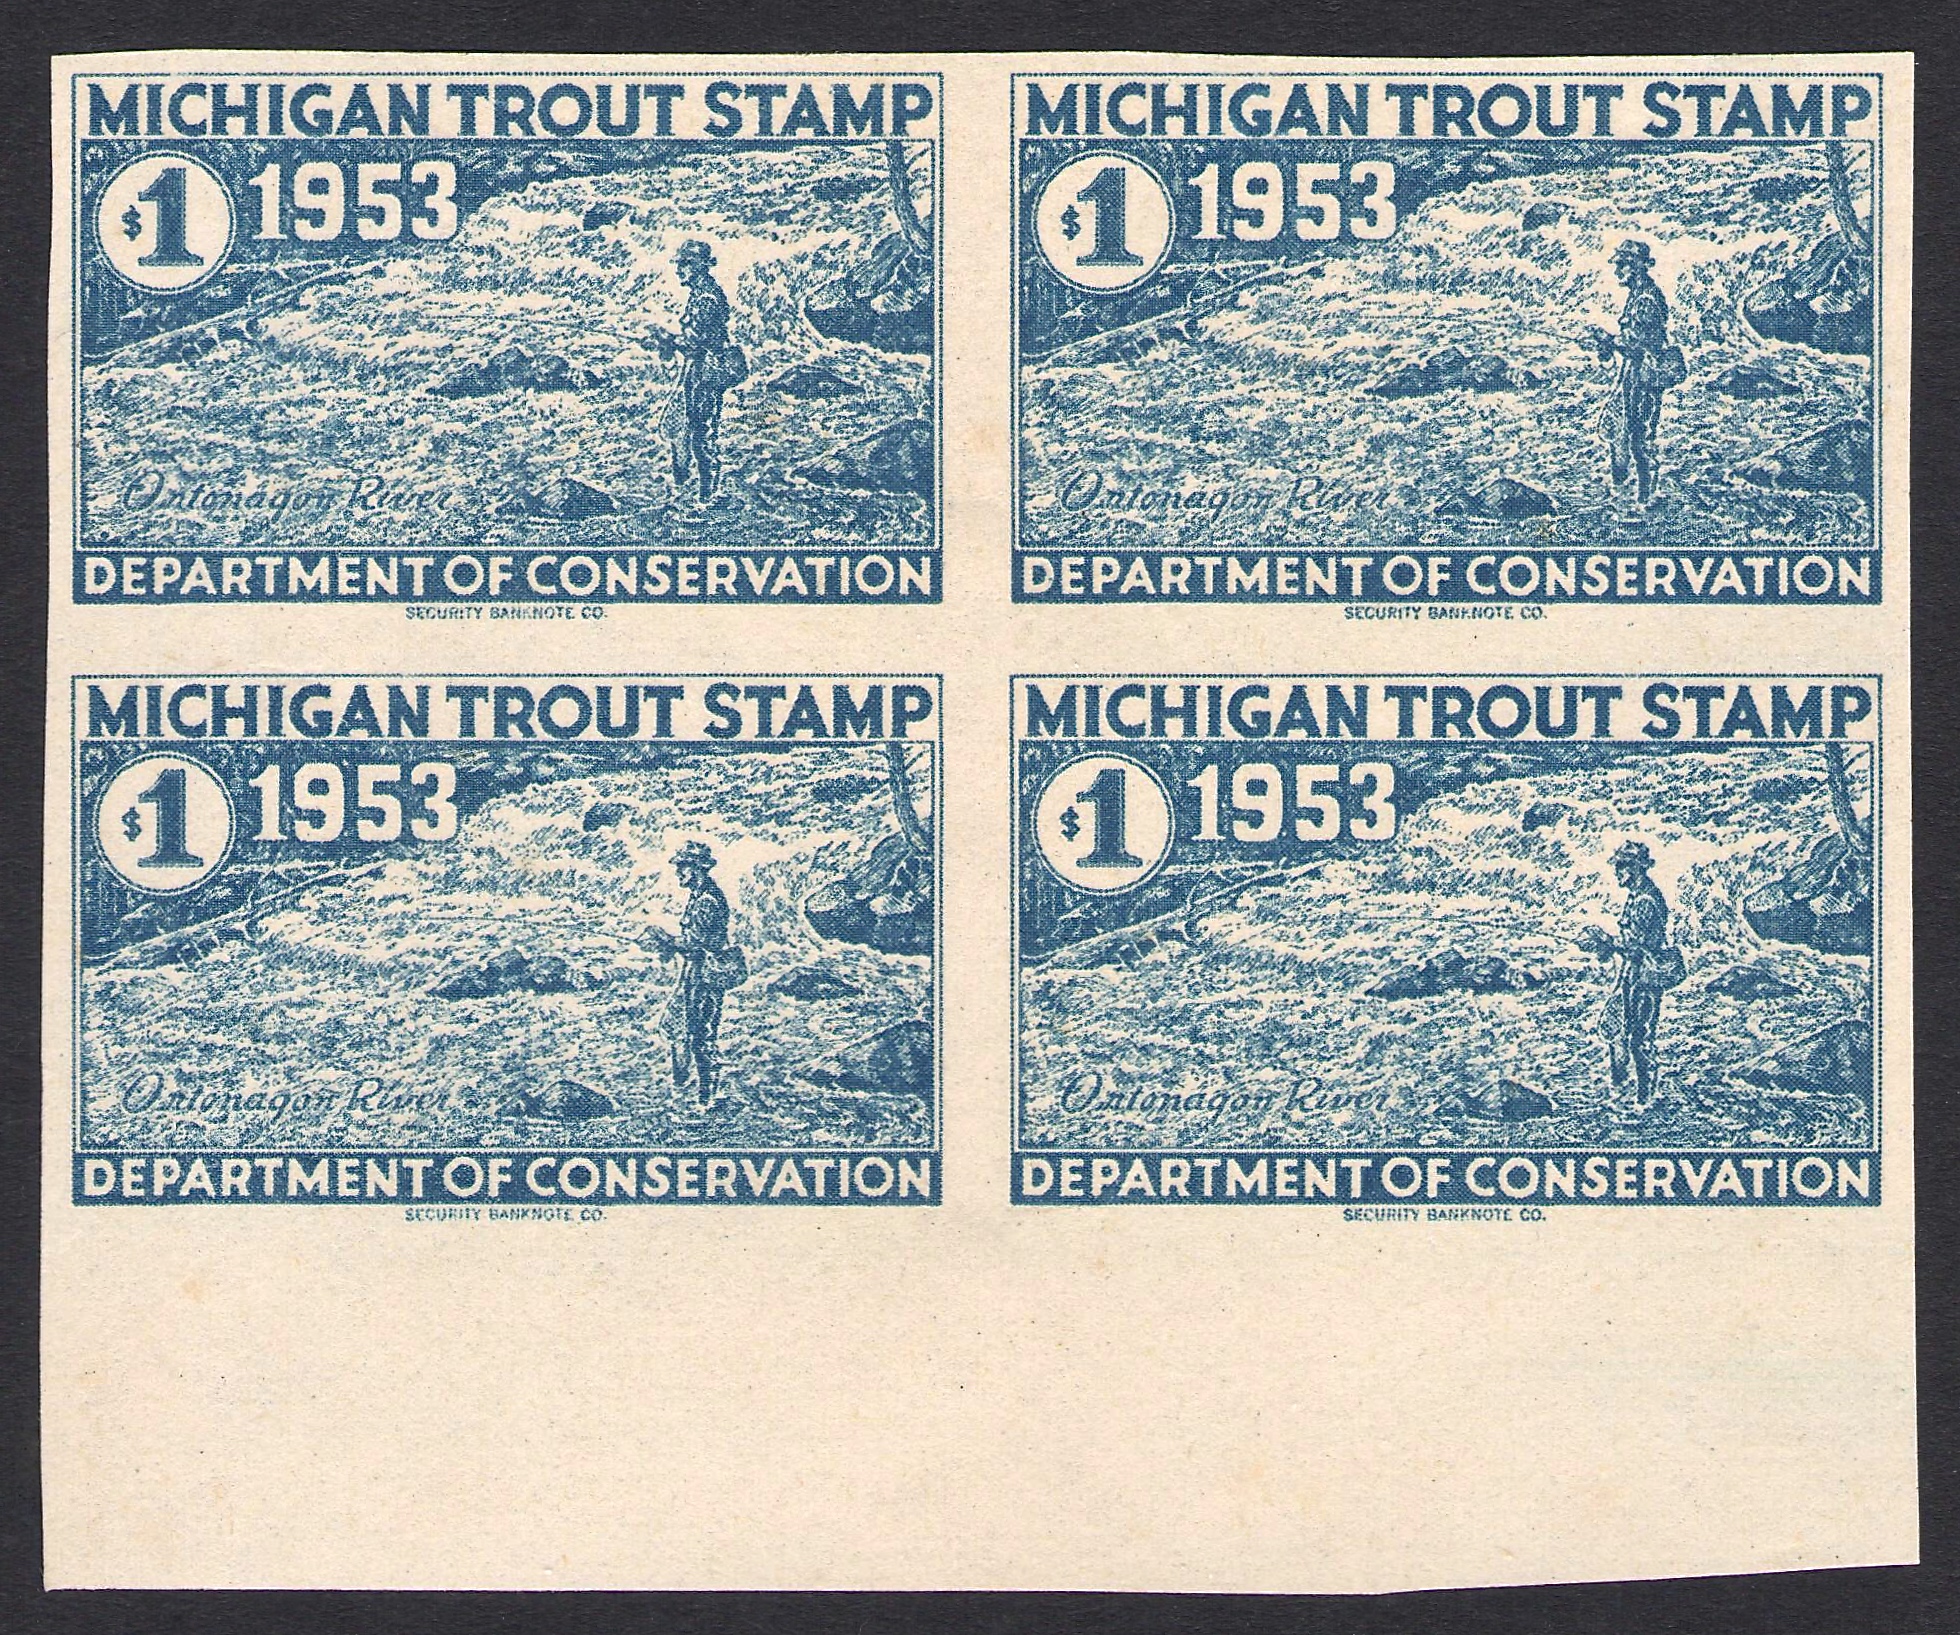 1953 Plate Proof Block of Four Michigan Trout